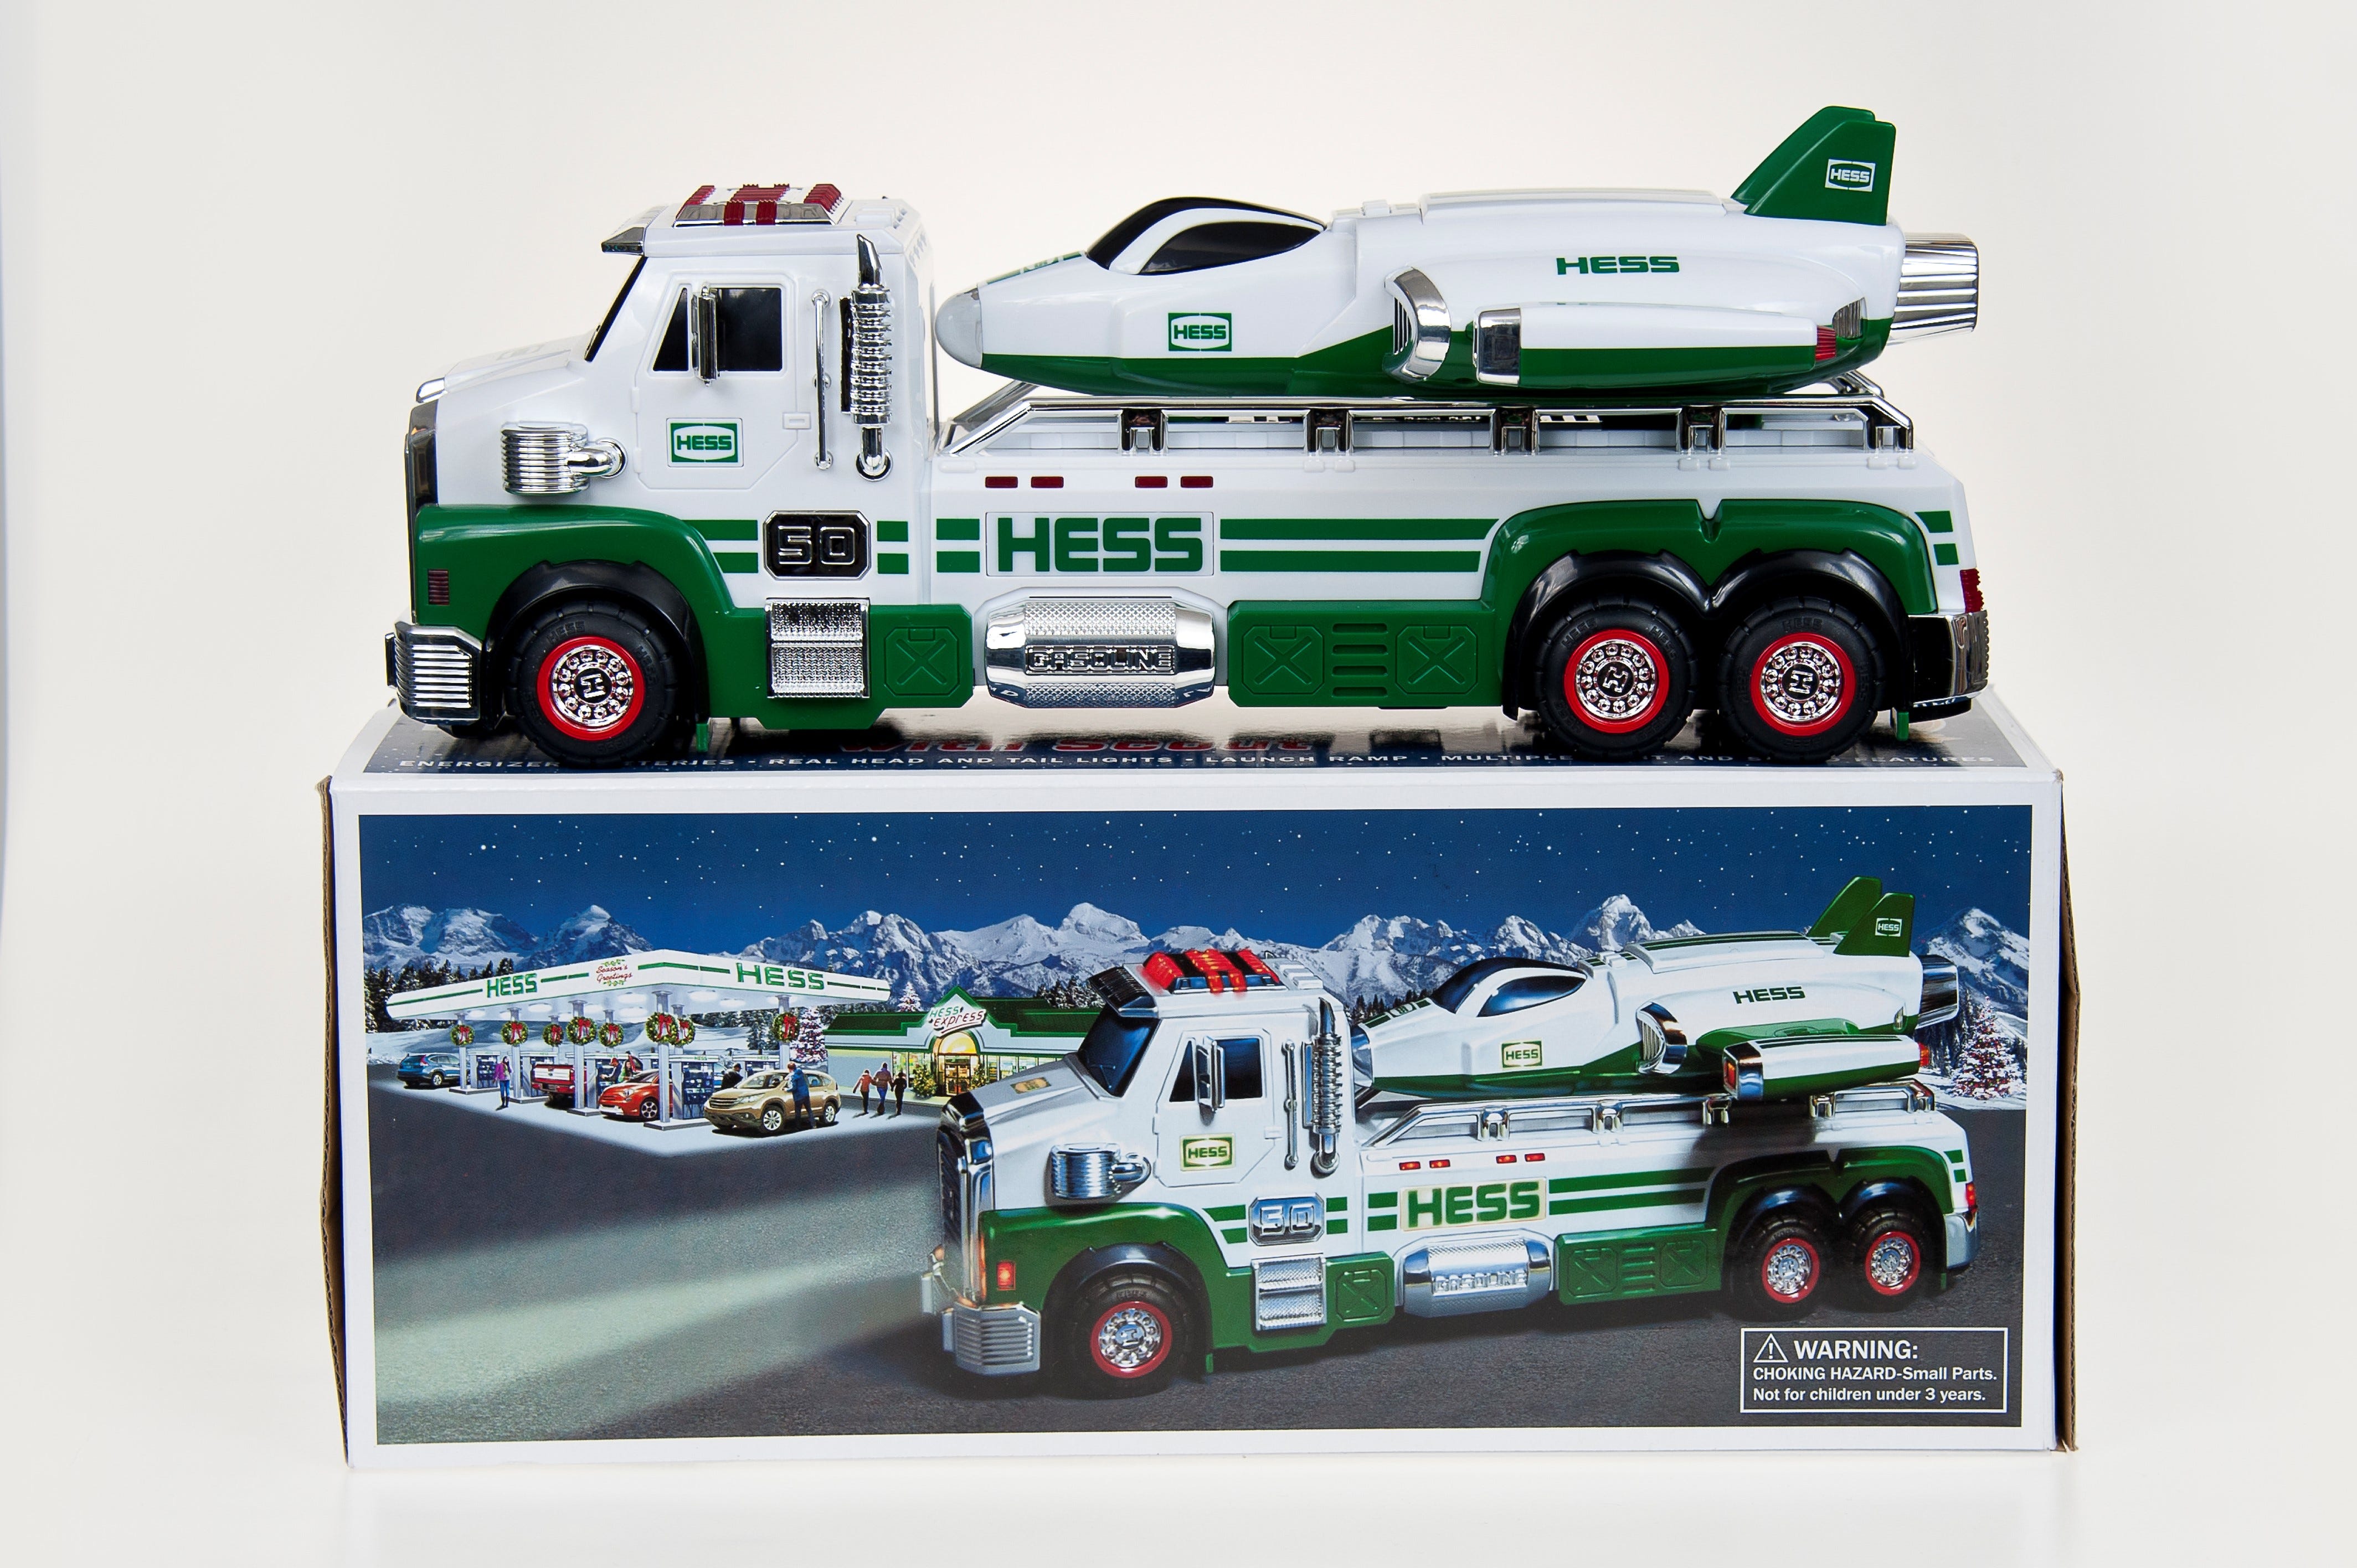 where can i get a hess truck